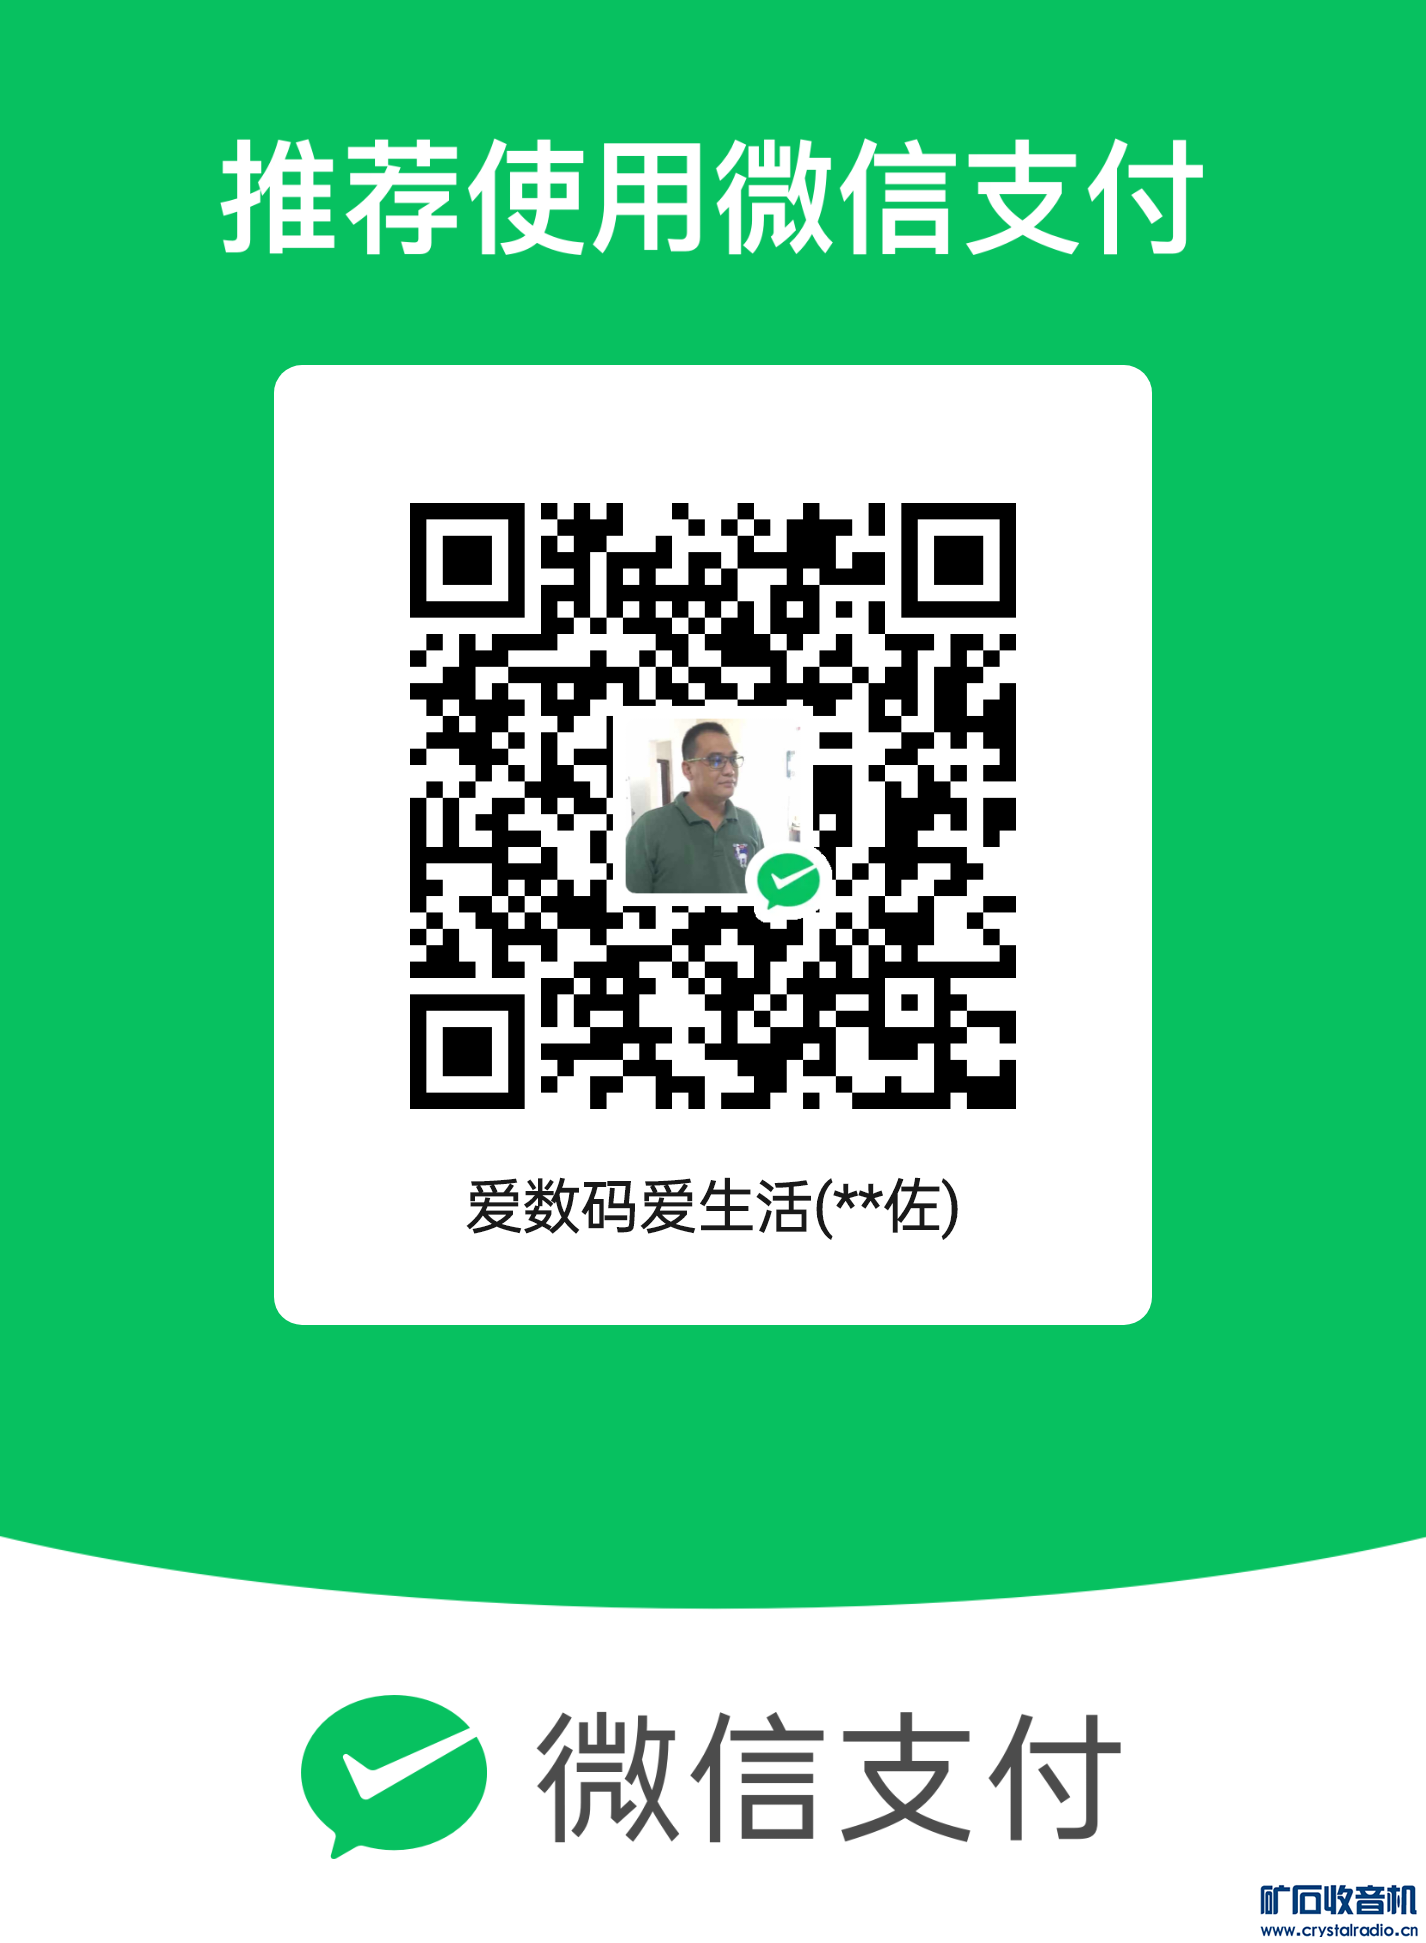 mm_facetoface_collect_qrcode_1709701660015.png